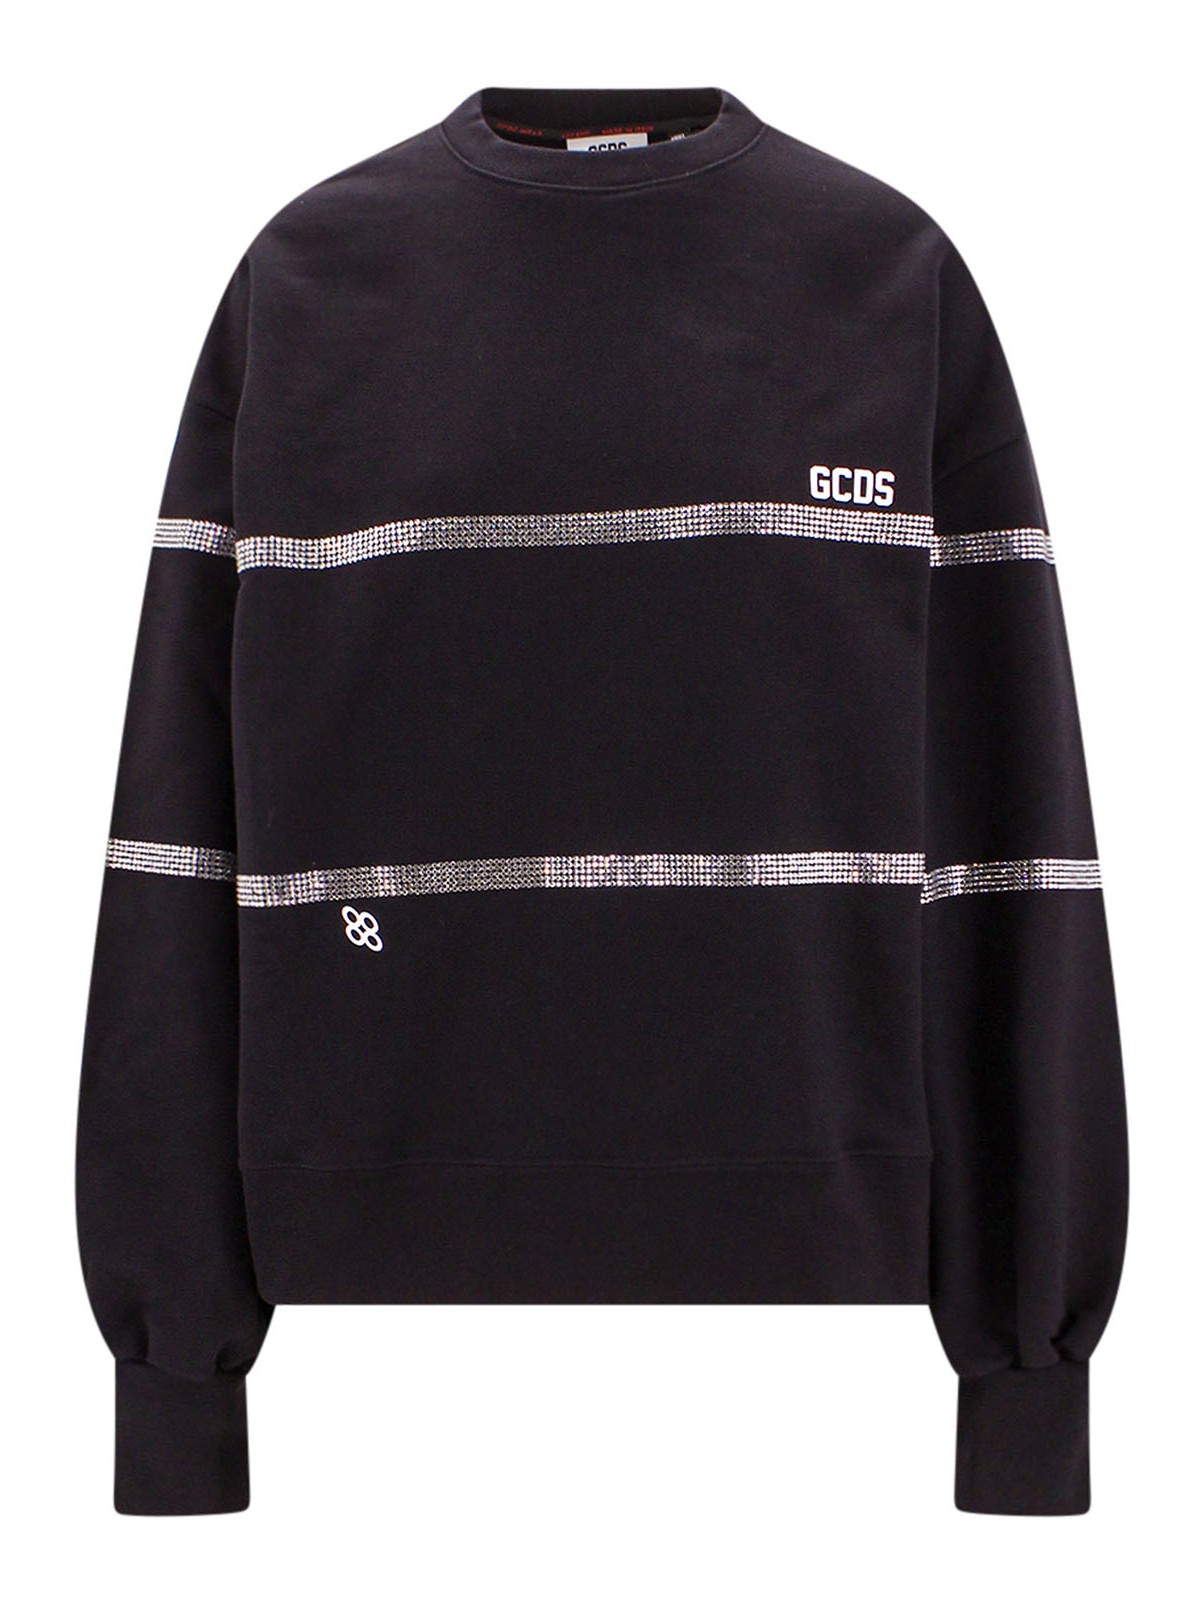 Gcds Cotton Sweatshirt With Frontal Logo Patch In Black